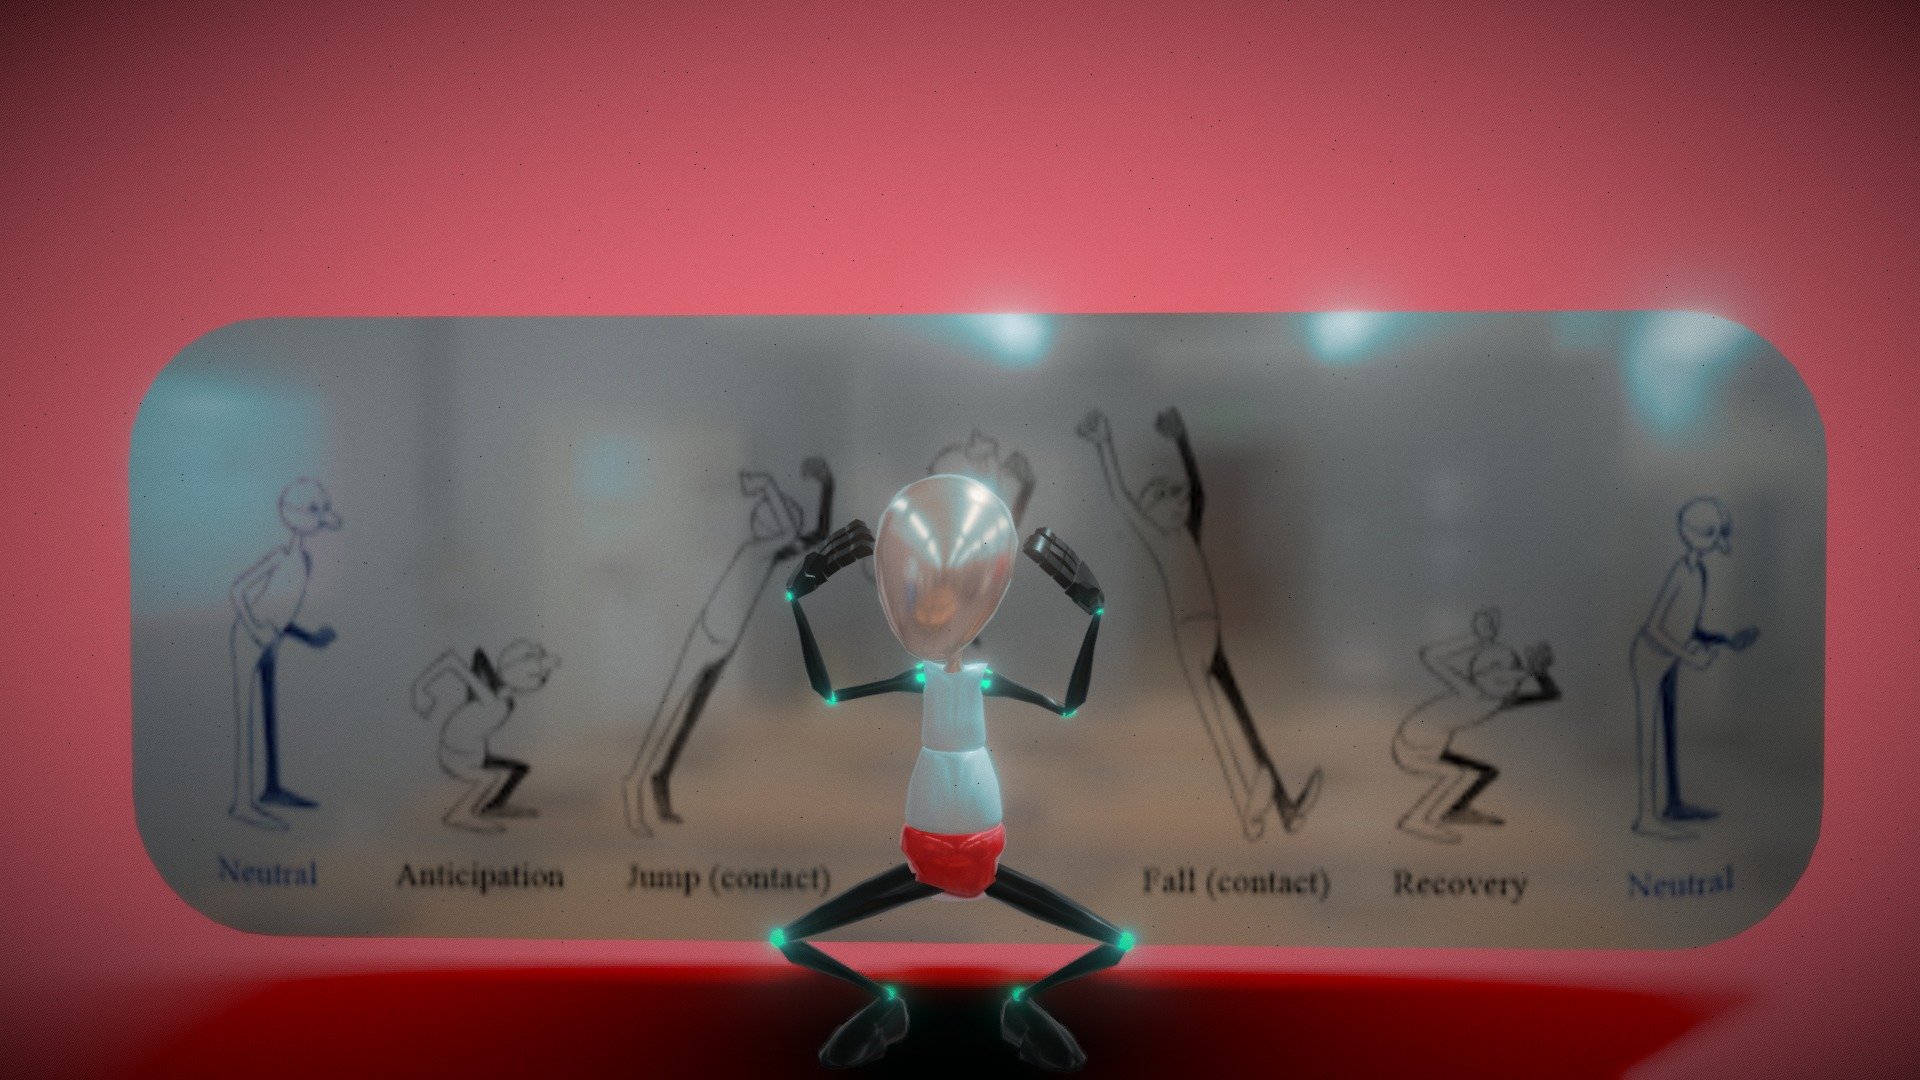 BOOK NAME: The Animator's Survival Kit.
Anticipation is the preparation for an action such as a jump or a punch. For example, a character will squat down before pushing his body and legs up into a jump. The stronger the anticipation motion, the more cartoony and fluid the animation will be. The smaller the anticipation, the more stiff the animation will be 3d model